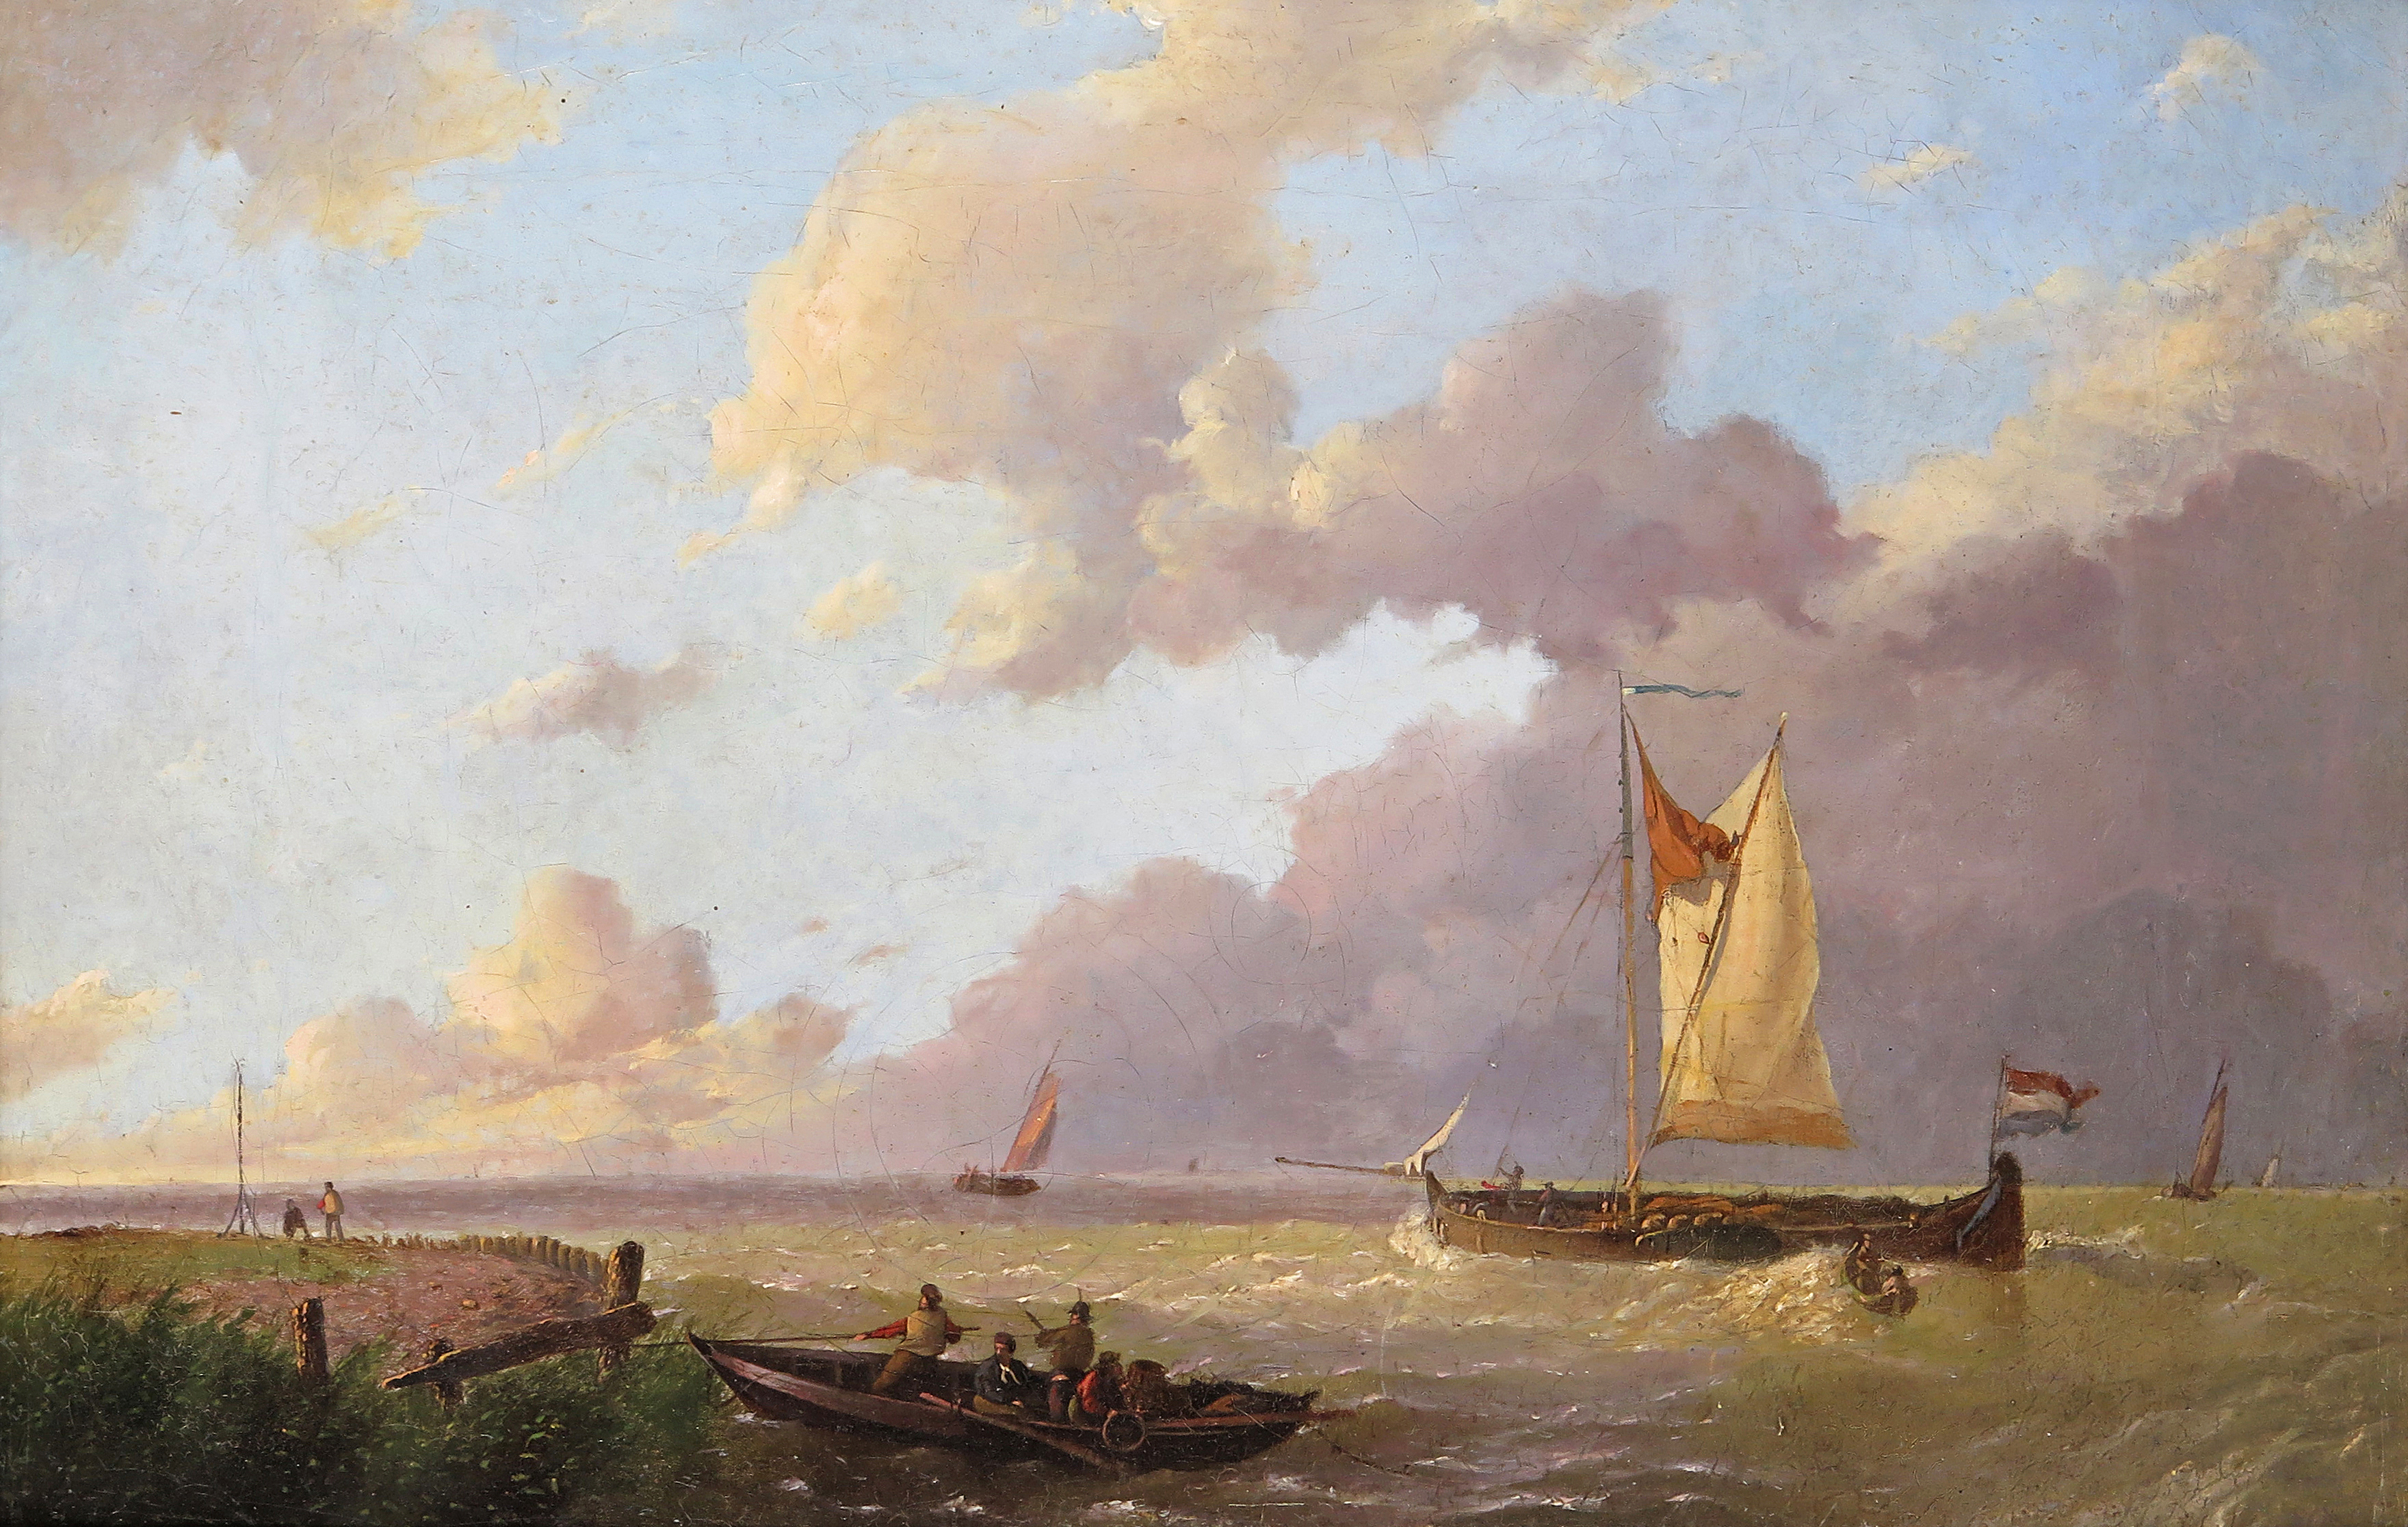 Dutch School early 19th Century Shipping off the coast Oil on canvas 25 x 36.5cm; 10 x 14¼in General